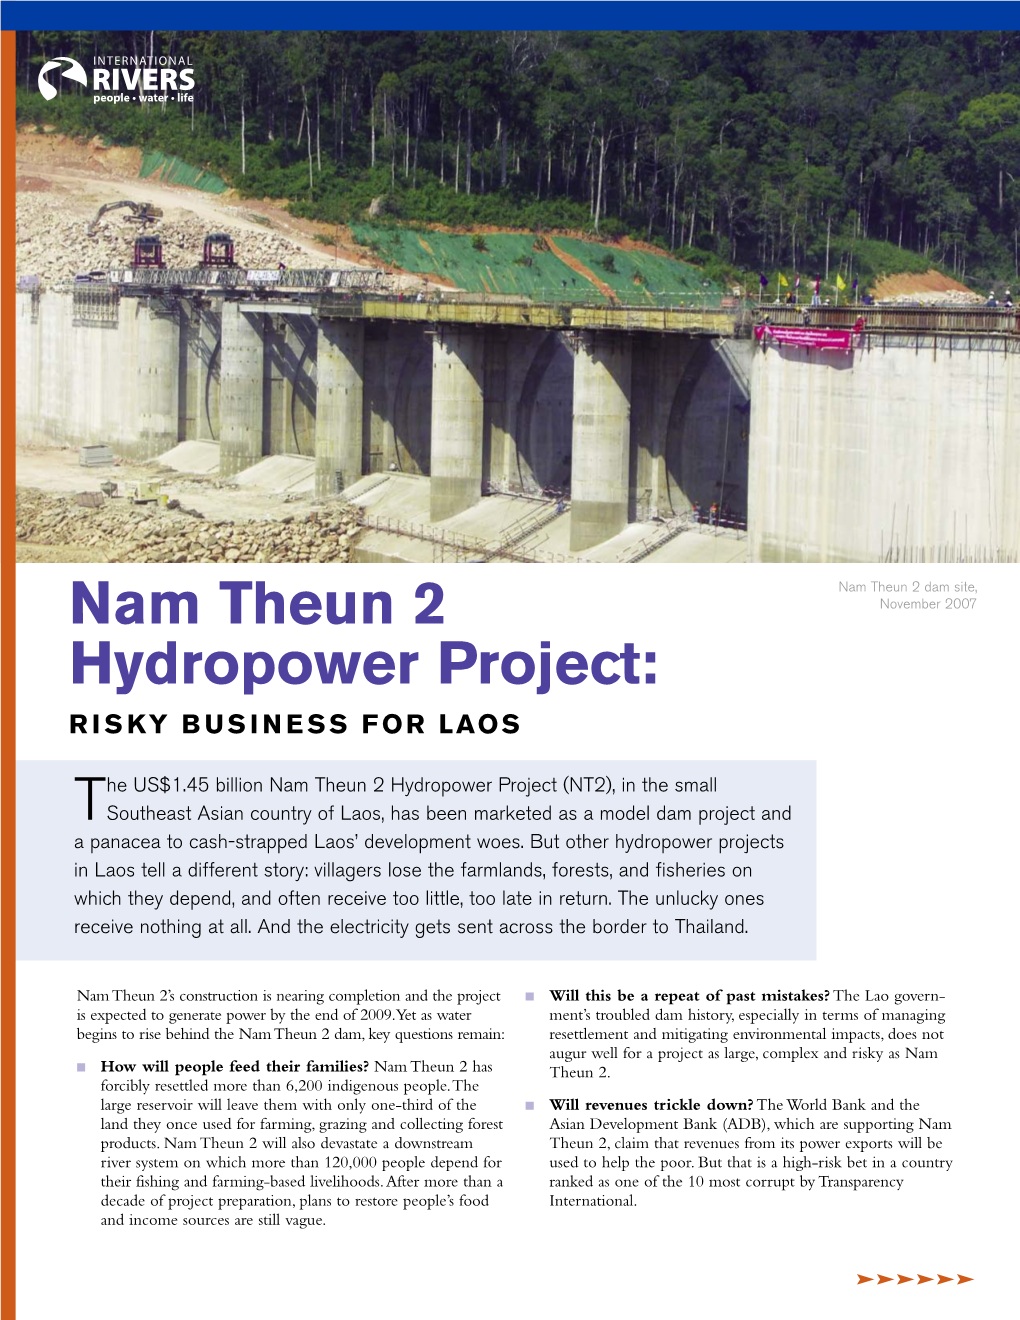 Nam Theun 2 Hydropower Project: Risky Business for Laos